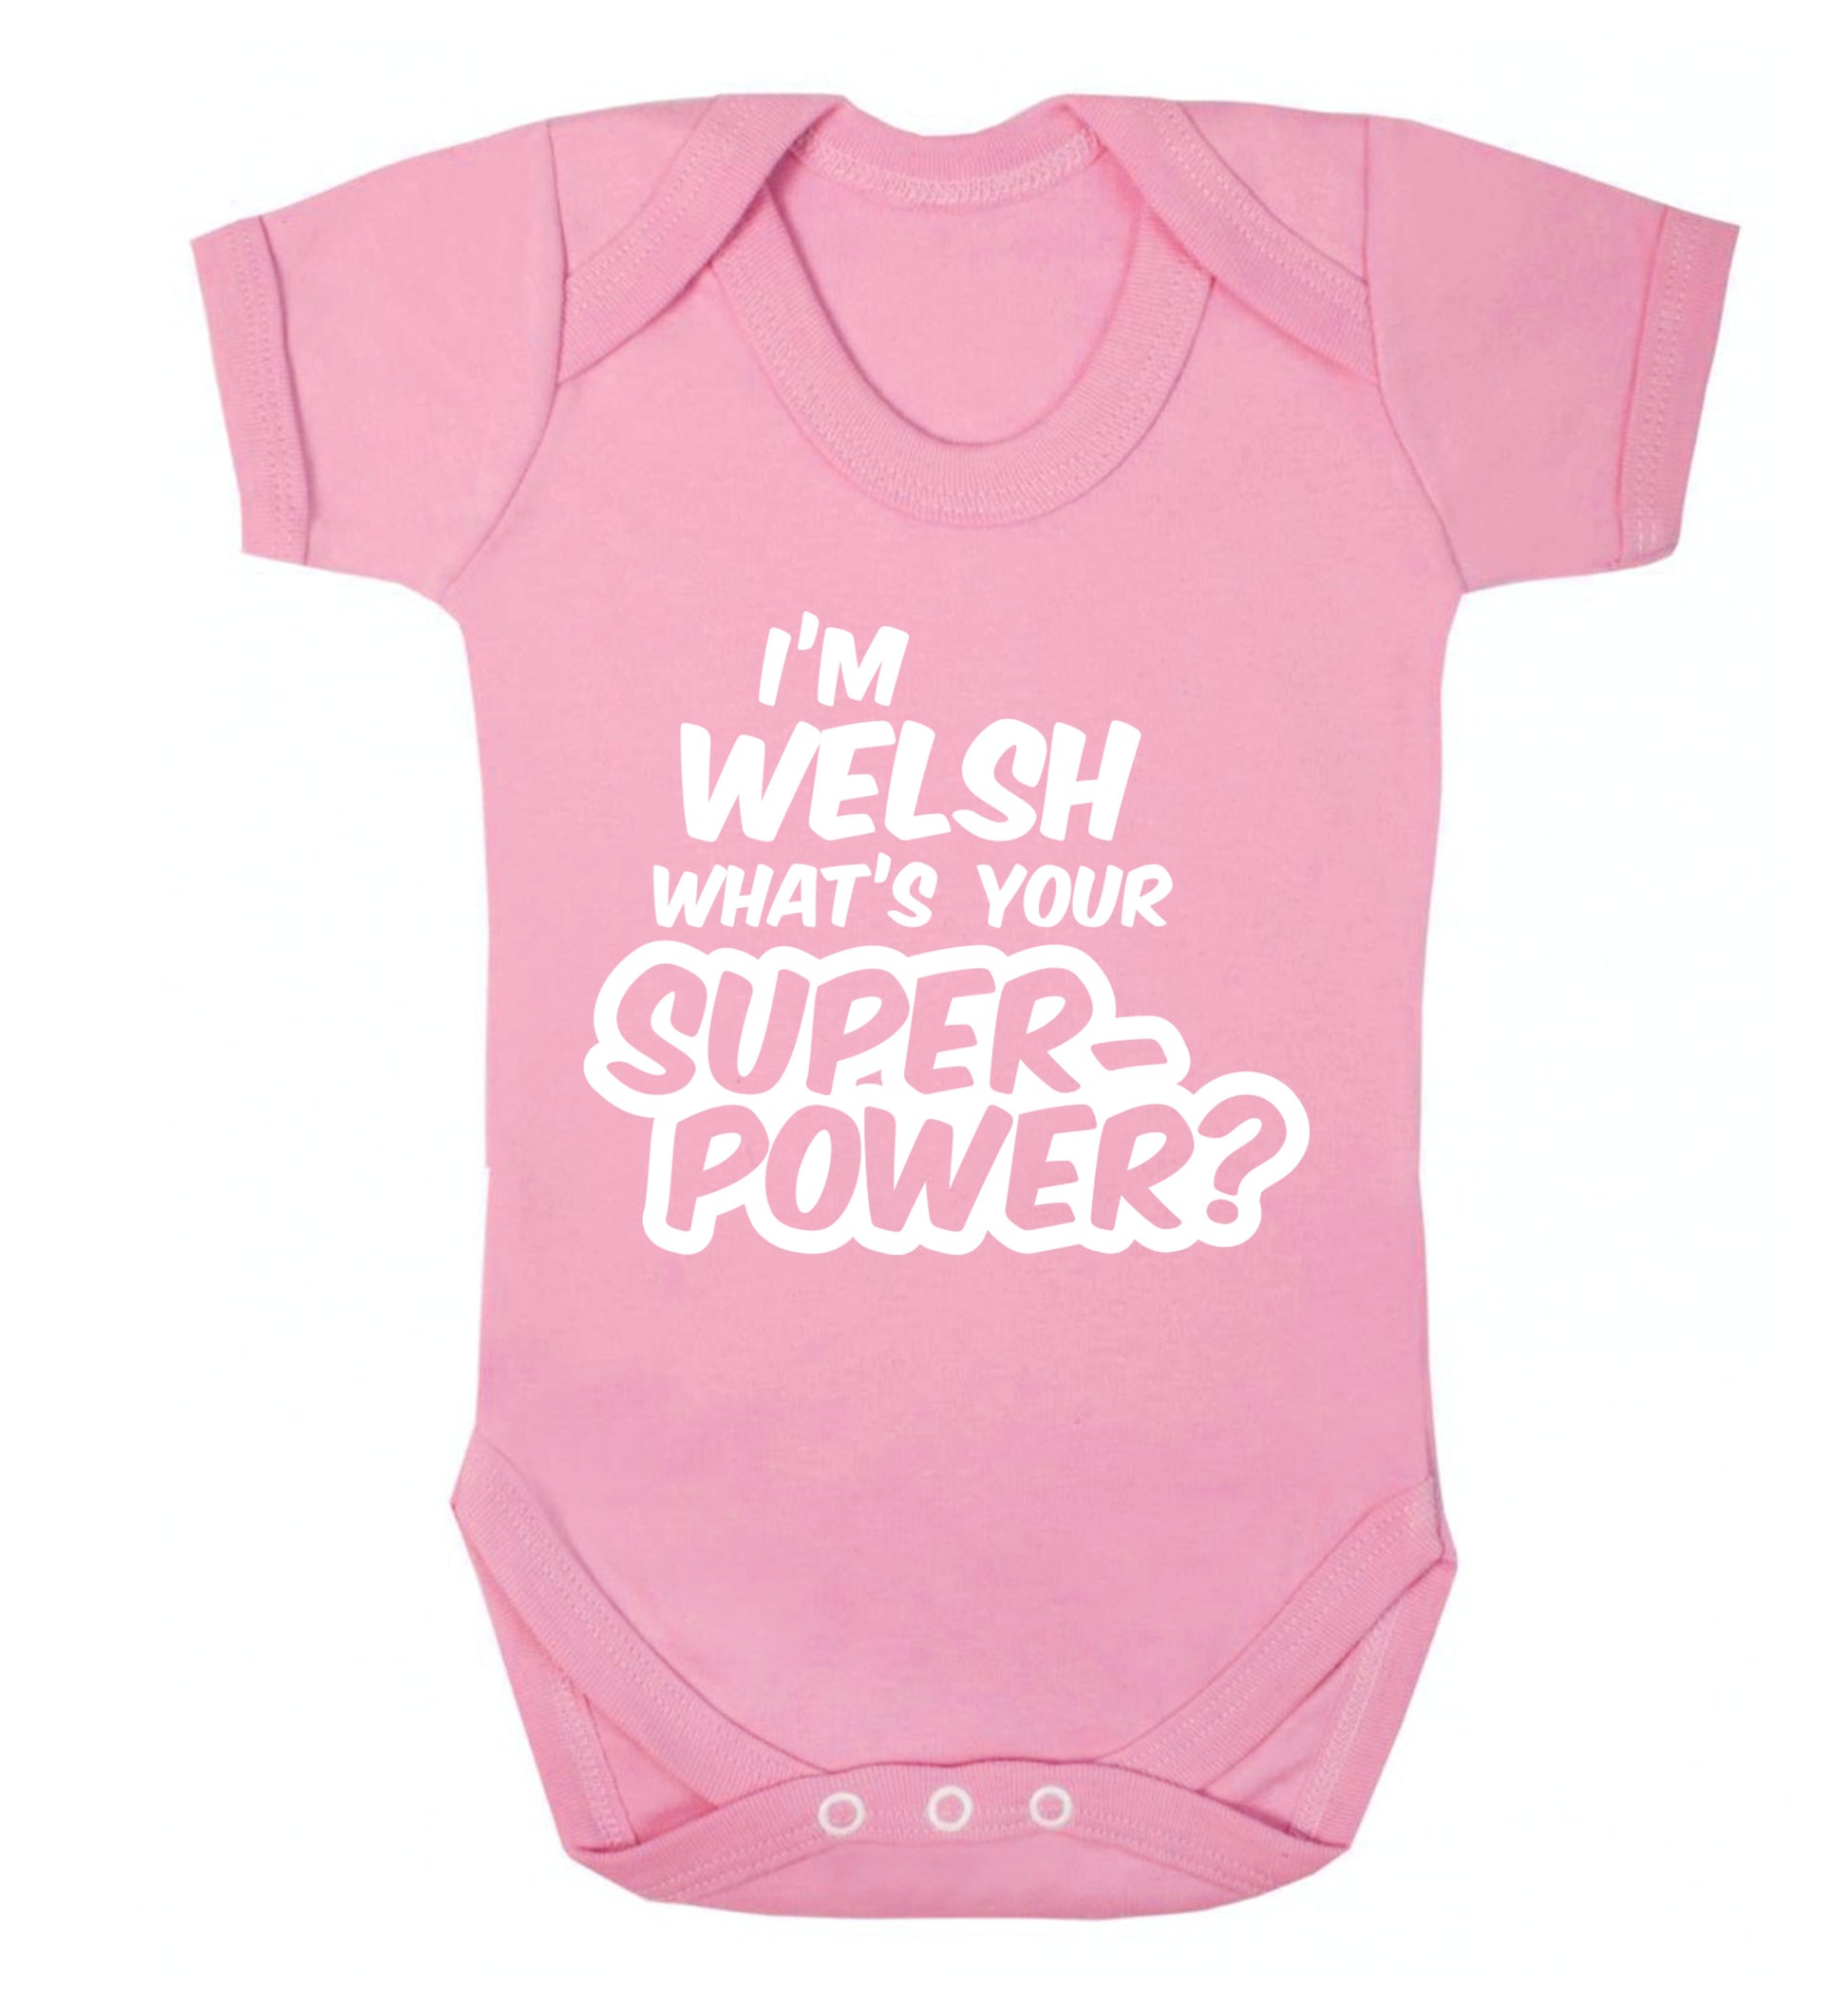 I'm Welsh what's your superpower? Baby Vest pale pink 18-24 months